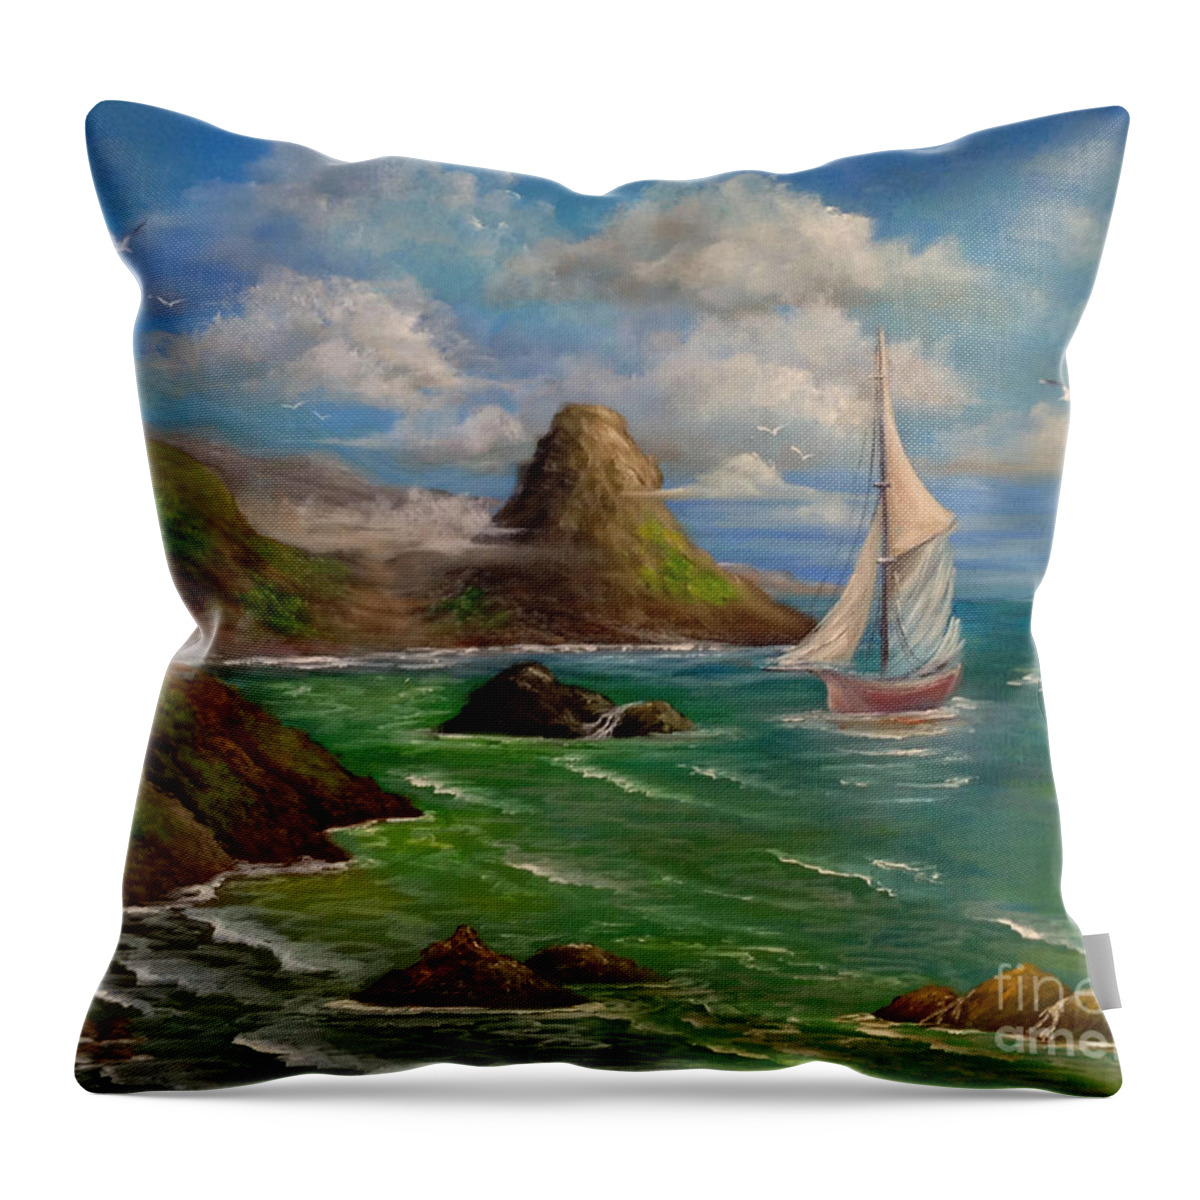 Ships Throw Pillow featuring the painting By Tomorrow by Bella Apollonia